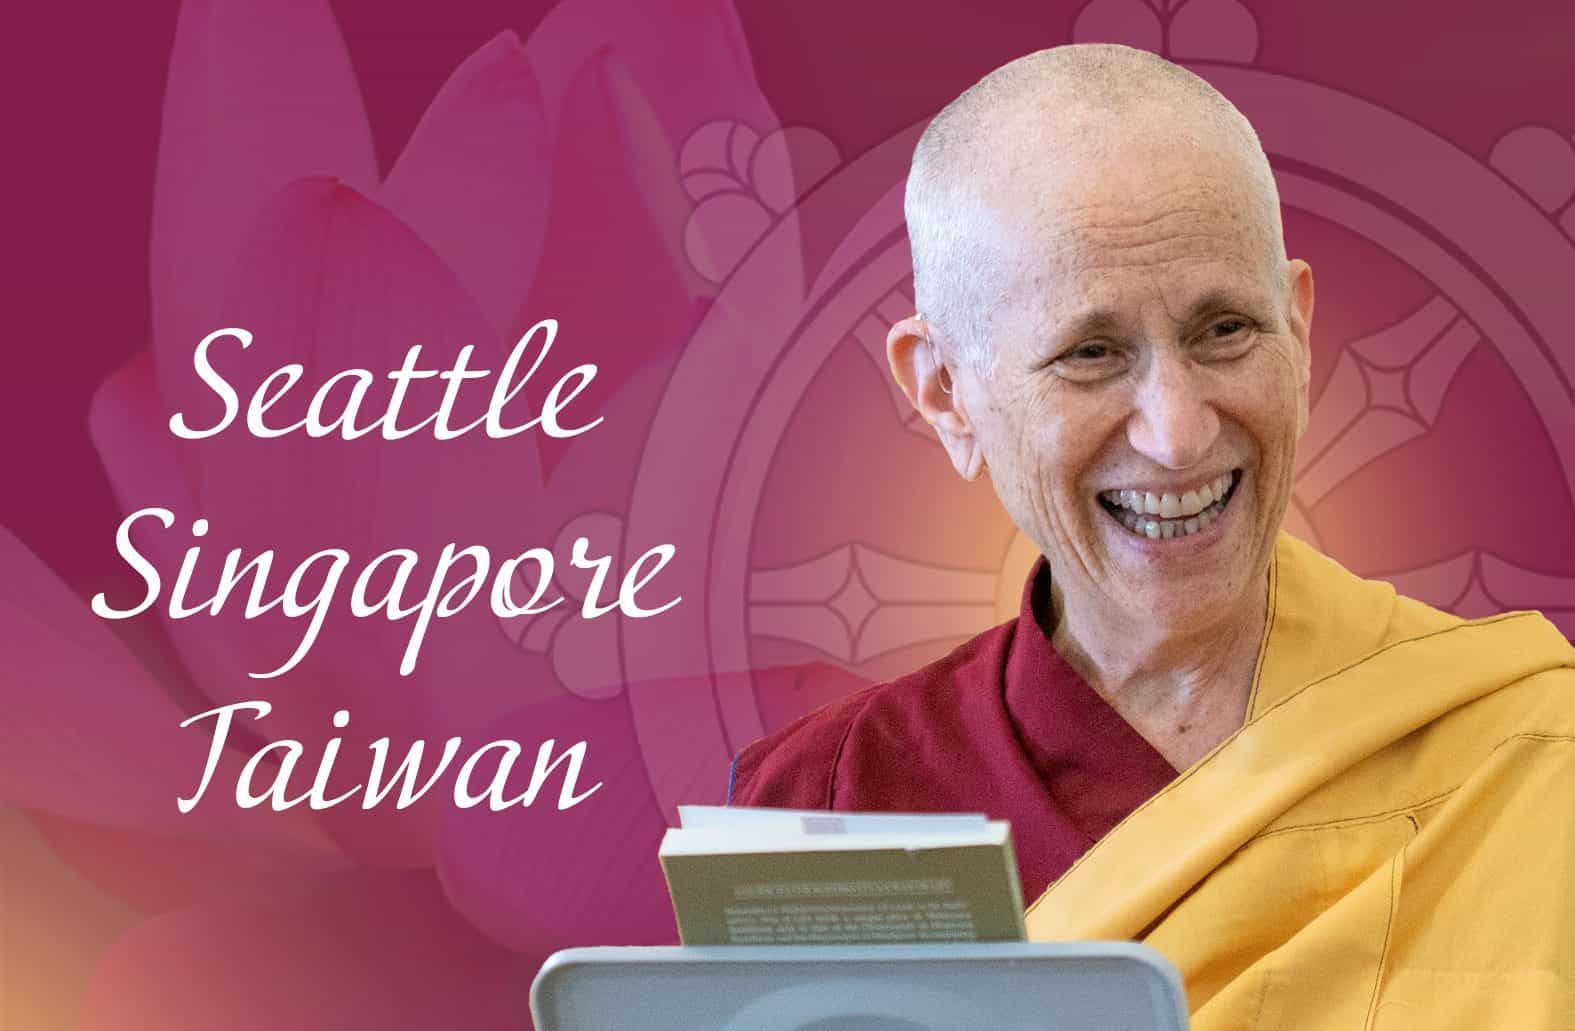 Venerable Thubten Chodron's teaching tour 2022 in Seattle, Singapore, and Taiwan.